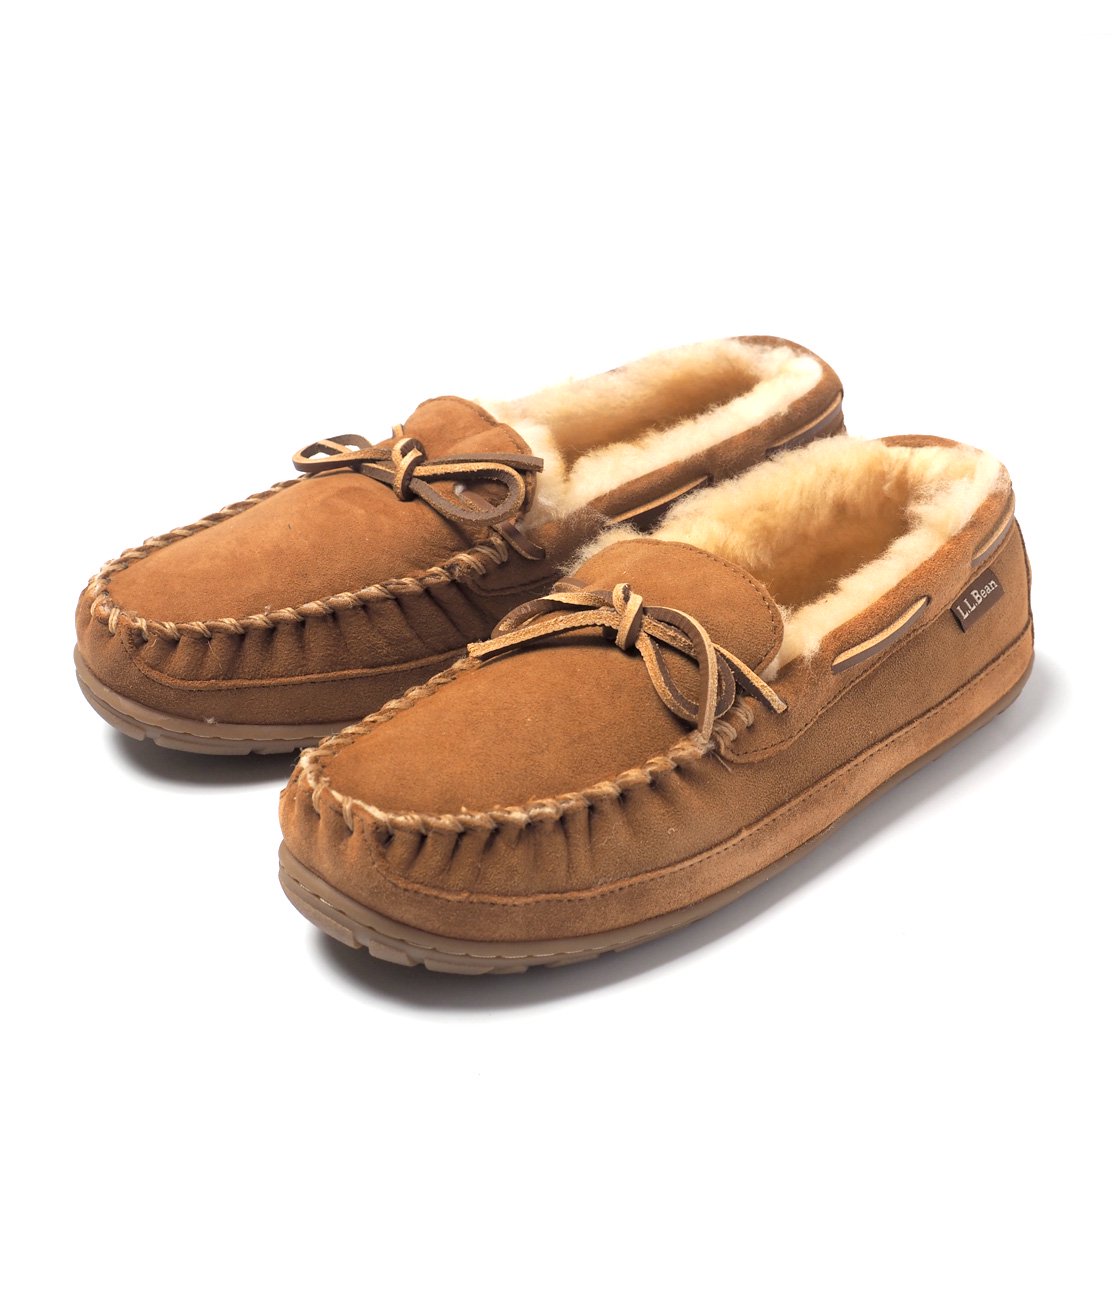 【L.L.Bean】WICKED GOOD SLIPPER MOCCASINS - BROWN モカシンシューズ スリッパ 暖かい - HUNKY  DORY